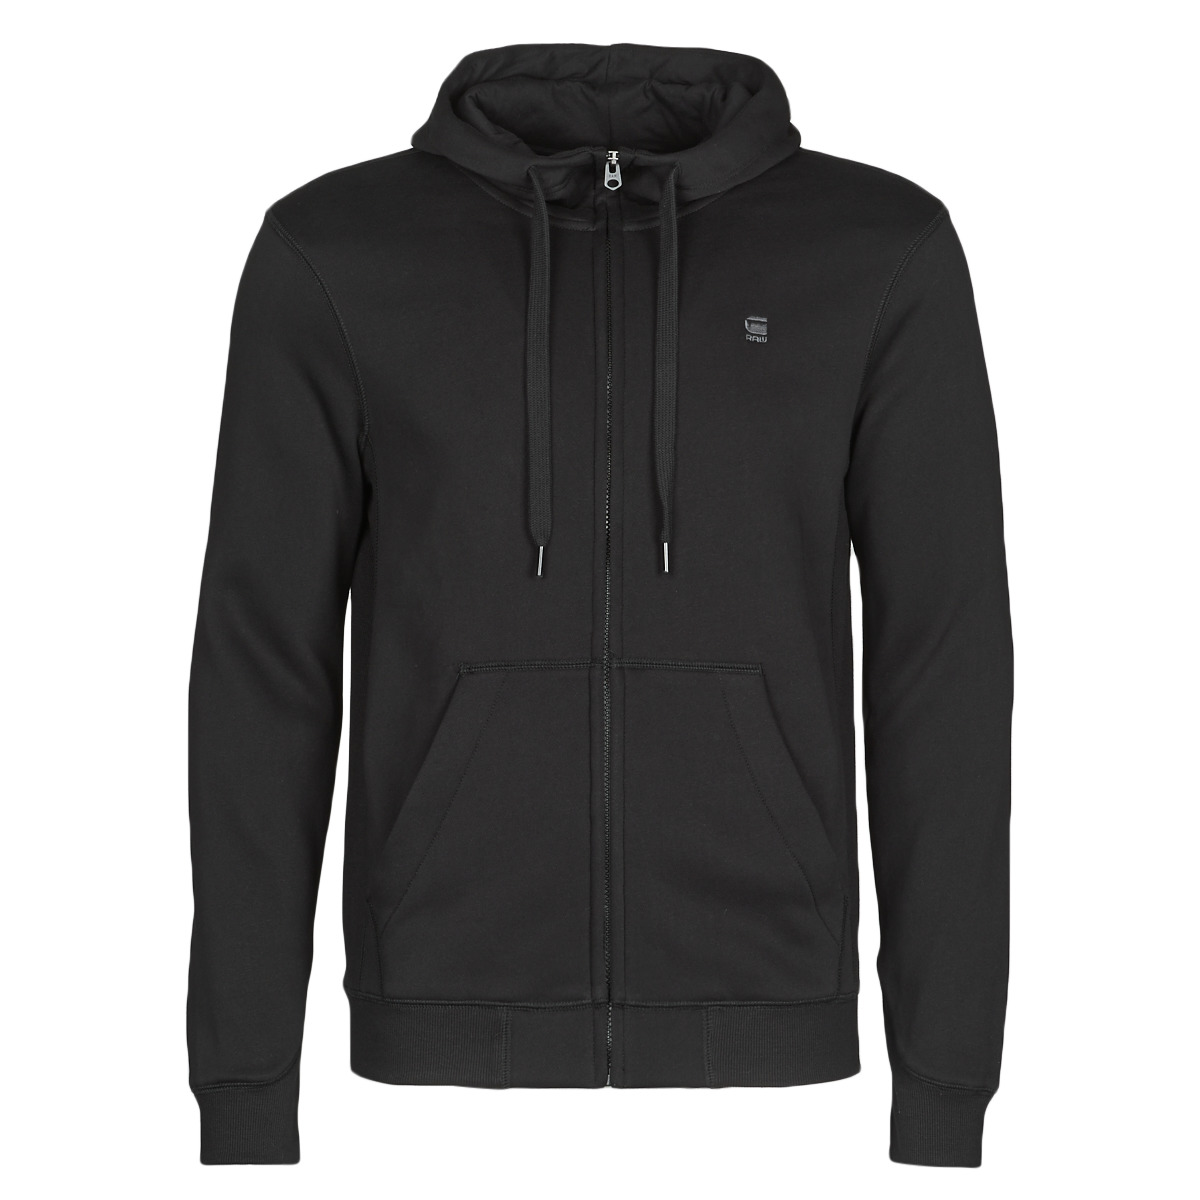 Black LS PREMIUM SW 110,00 Spartoo € ZIP delivery | CORE sweaters Clothing HDD G-Star Fast ! - Men Europe Raw -